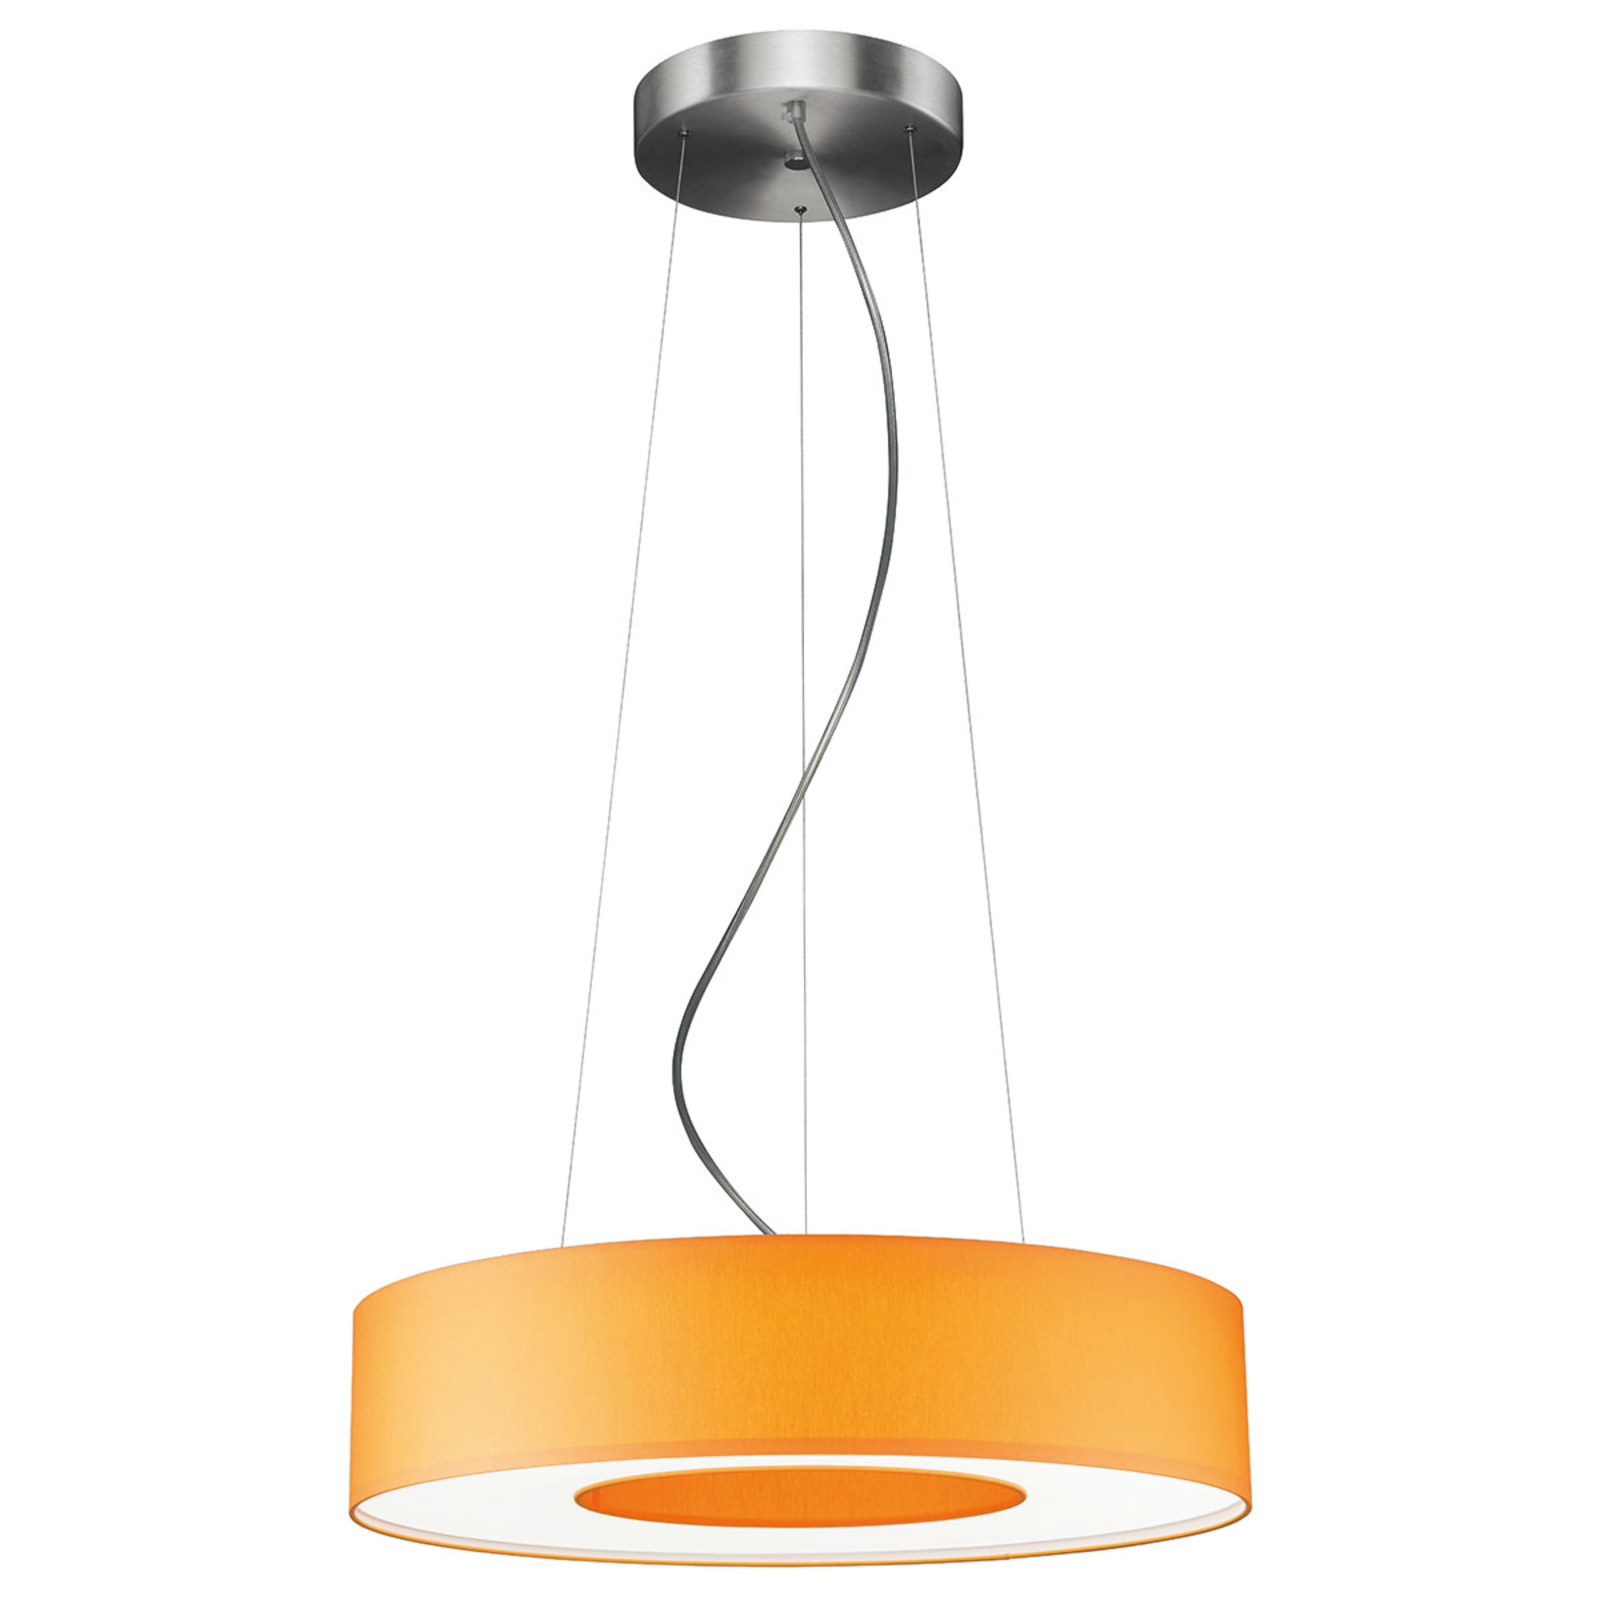 Suspension LED Donut dimmable 22 W orange